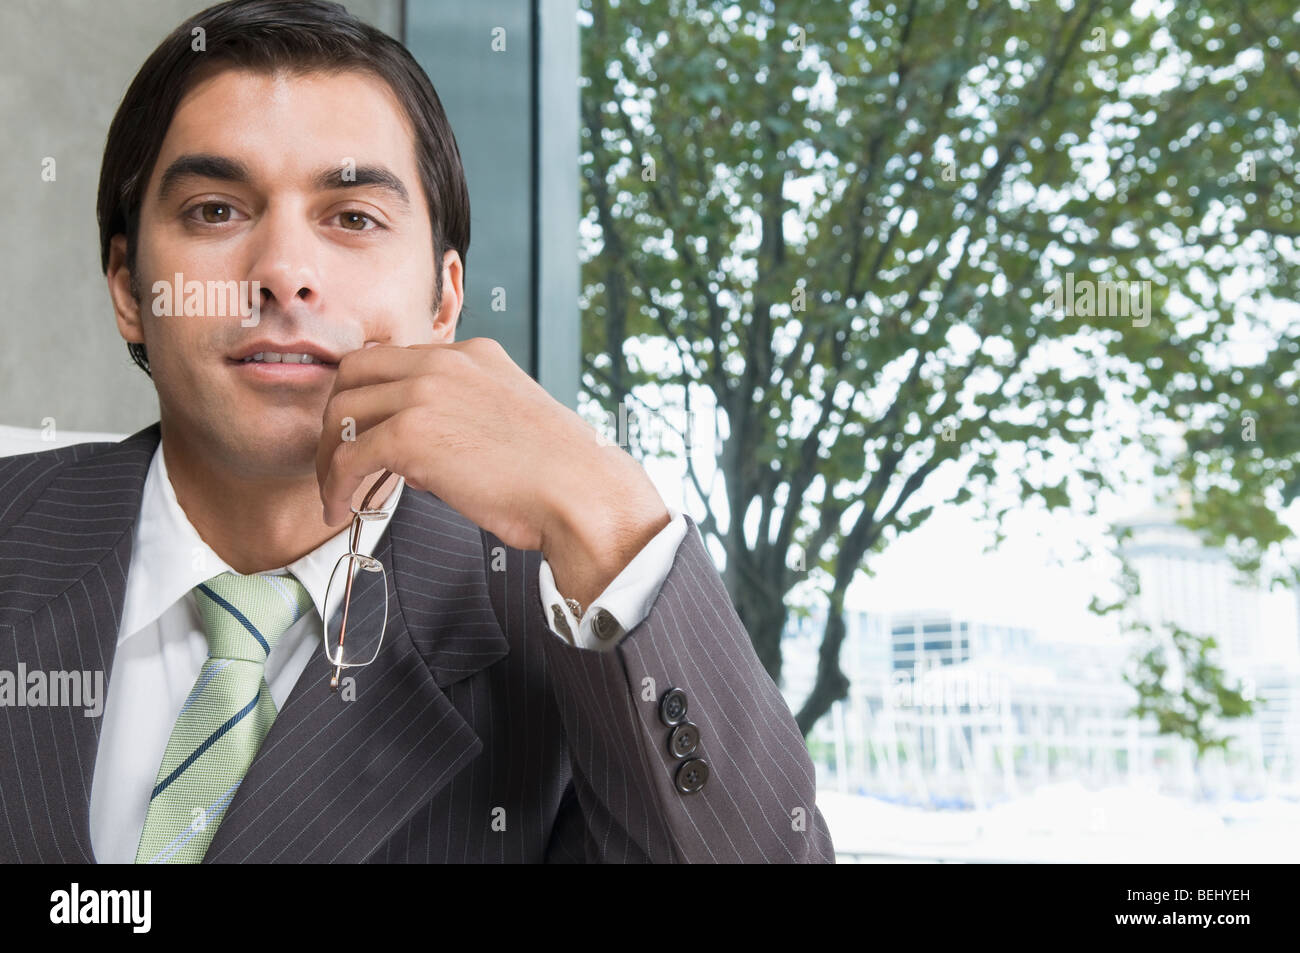 Portrait of a businessman in an office Stock Photo